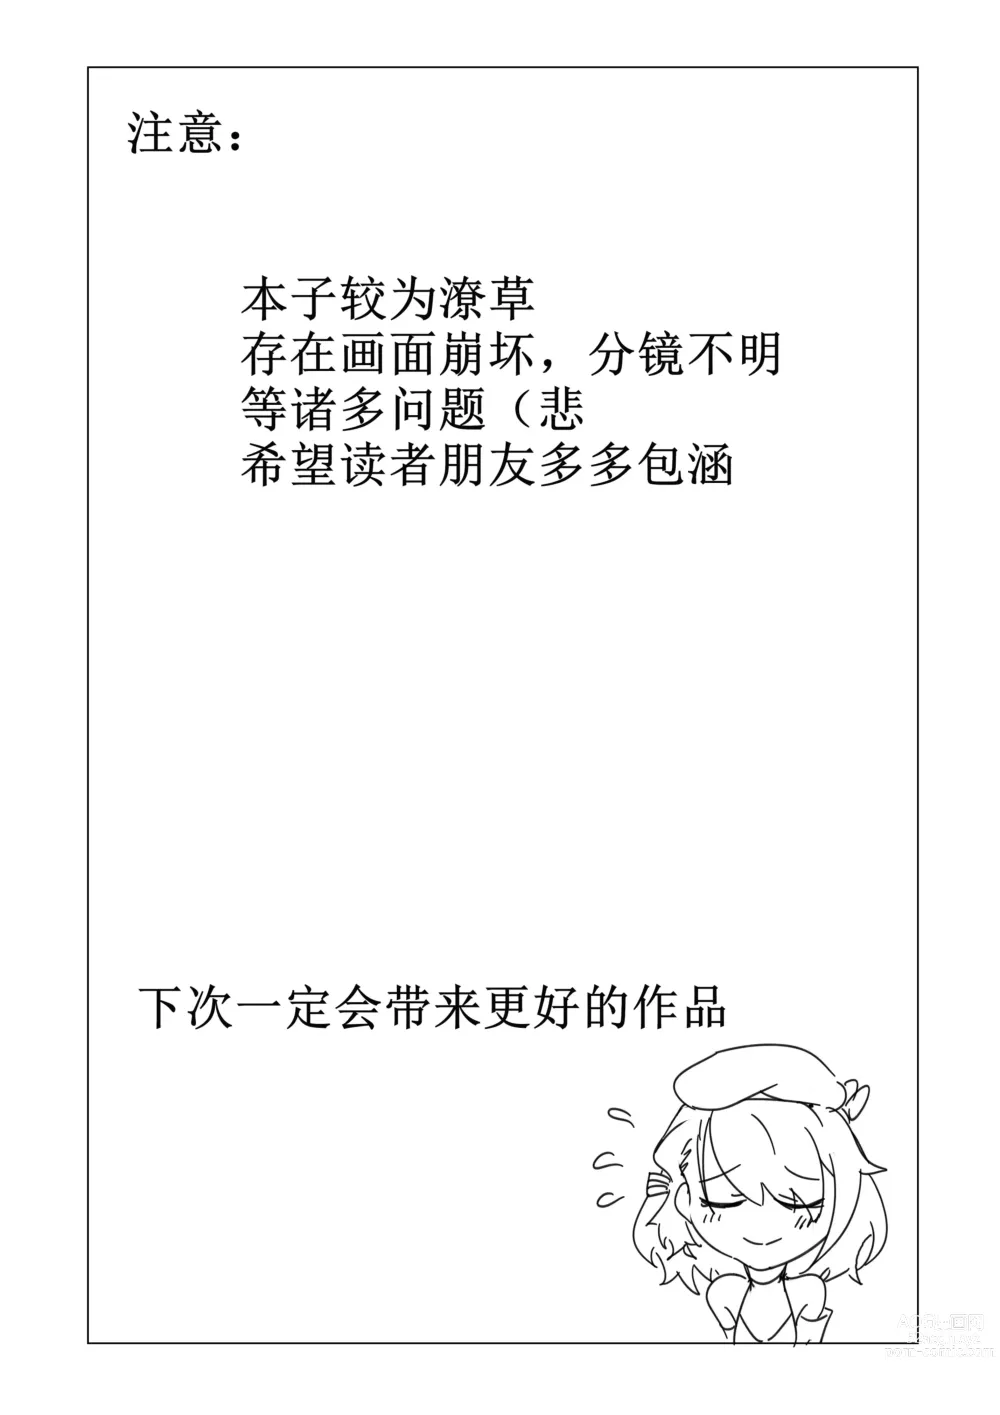 Page 1 of doujinshi Z23’s Ethics Correction